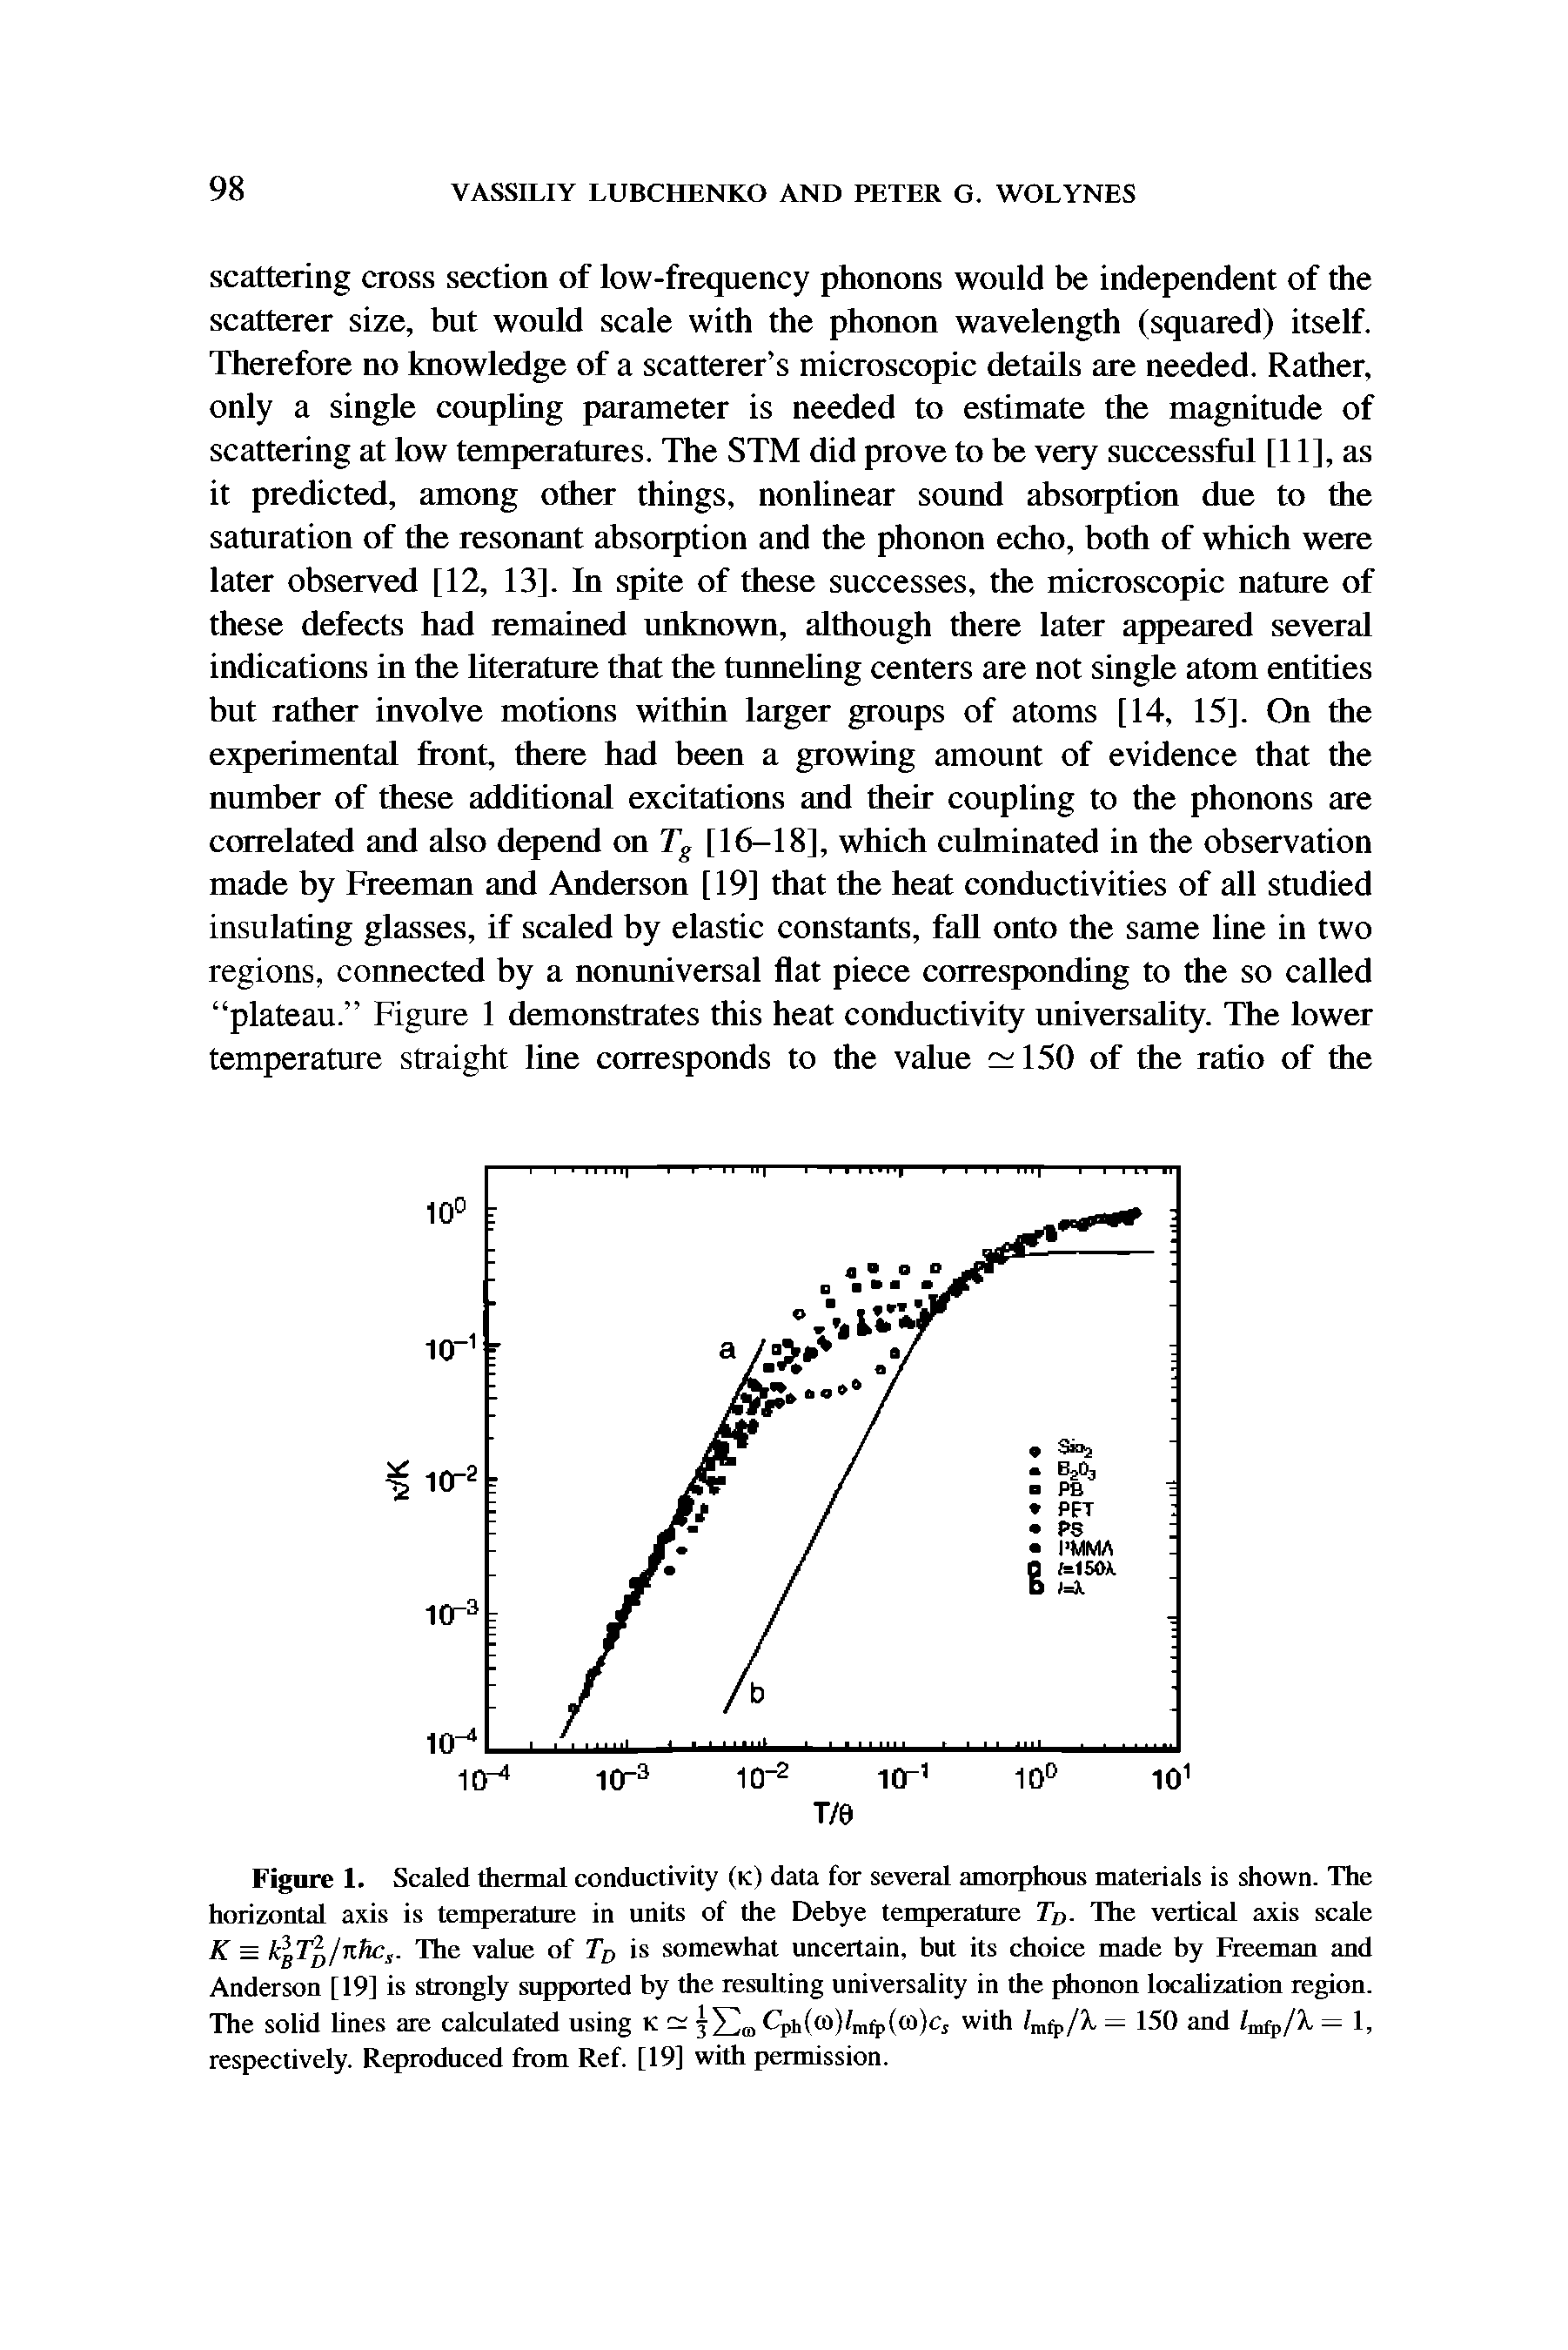 Figure 1. Scaled thermal conductivity (k) data for several amorphous materials is shown. The horizontal axis is temperature in units of the Debye temperature Tjj. The vertical axis scale K = The value of To is somewhat uncertain, but its choice made by Freeman and...